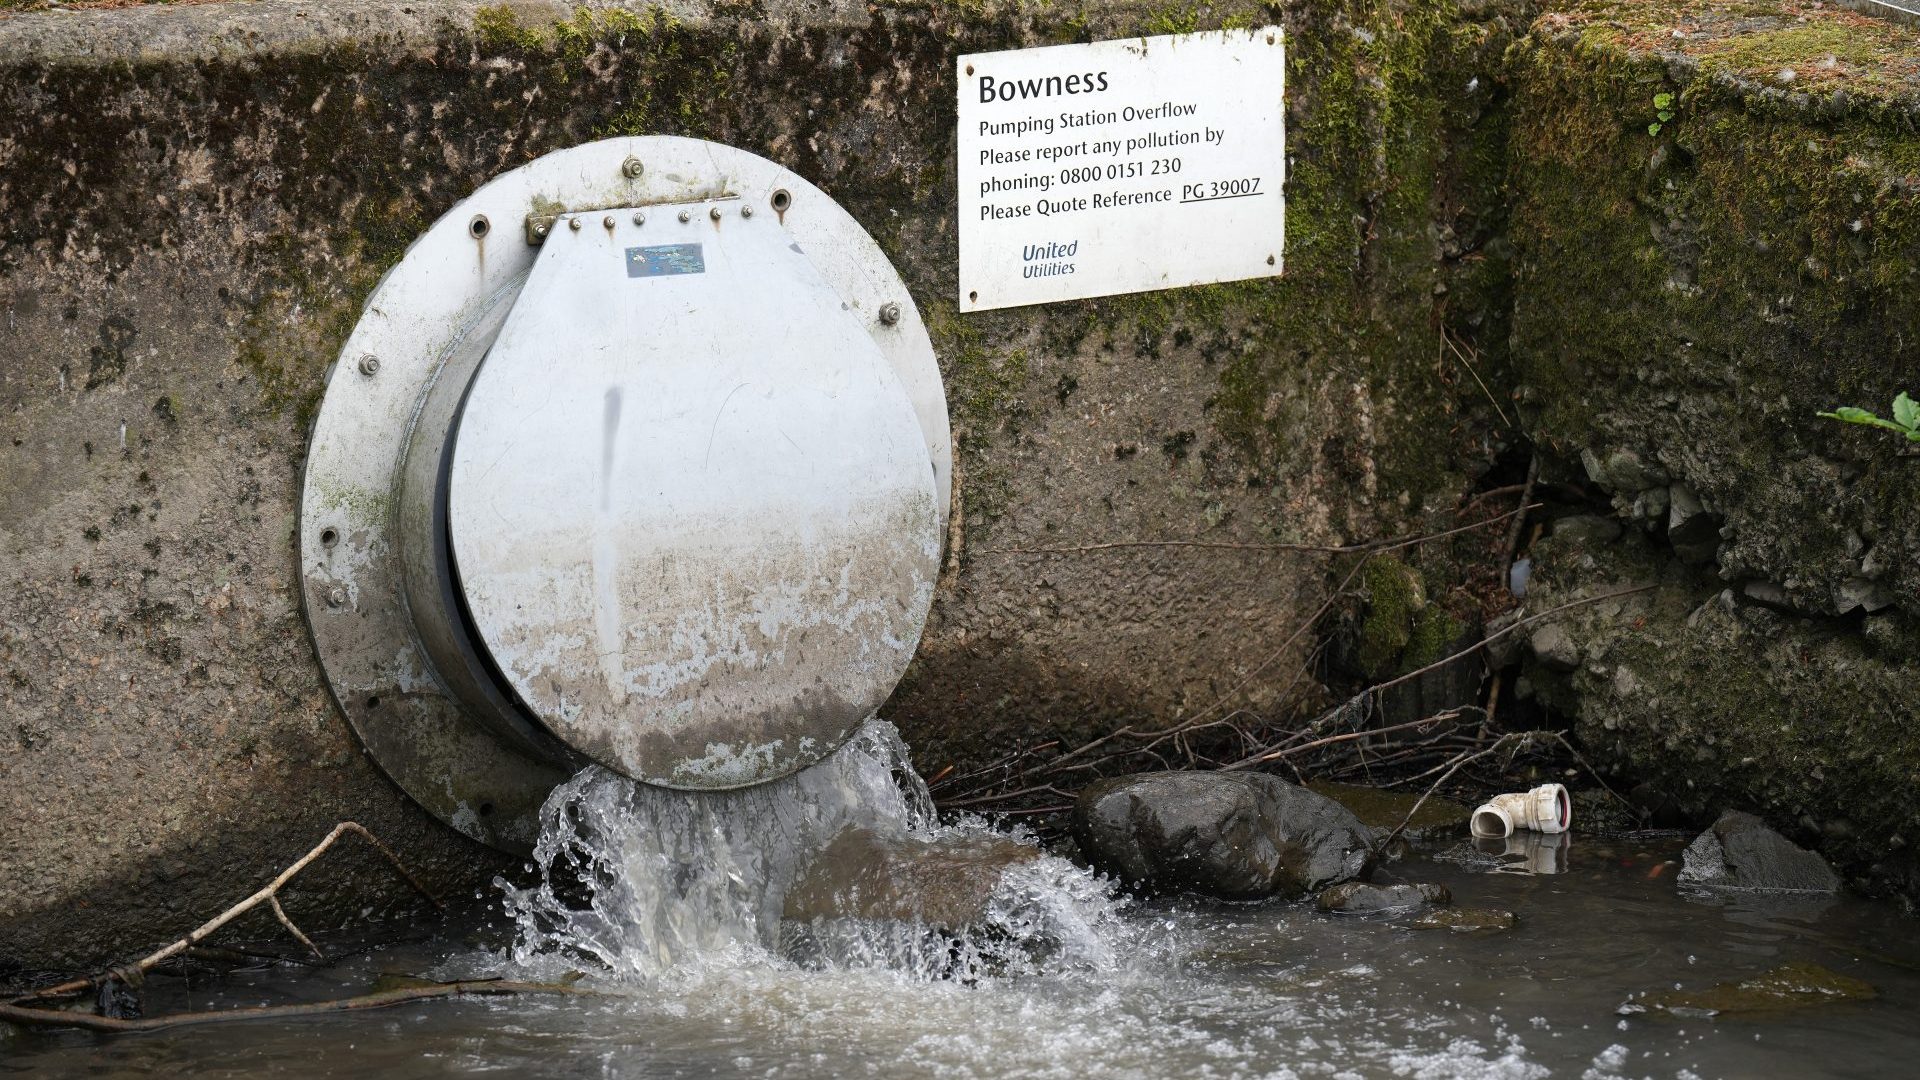 The United Utilities Bowness pumping station storm overflow pipe releases water into Lake Windermere (Photo by Christopher Furlong/Getty Images)